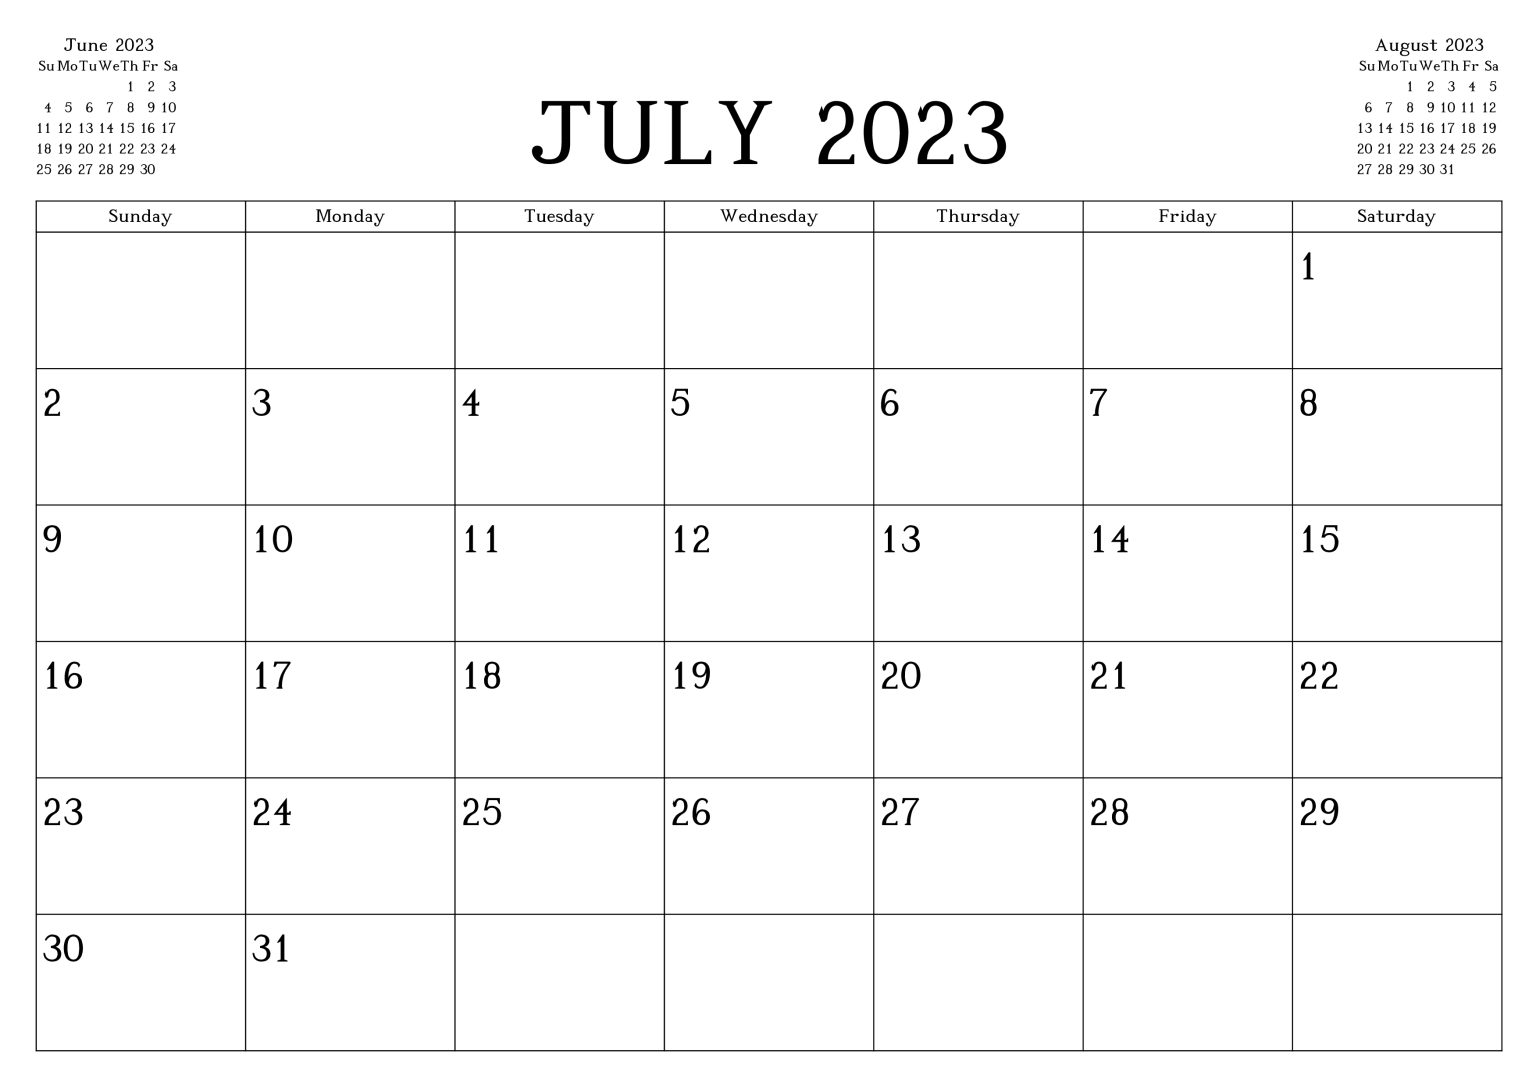 July 2023 Printable Calendar - Download Suitable One For Your Use